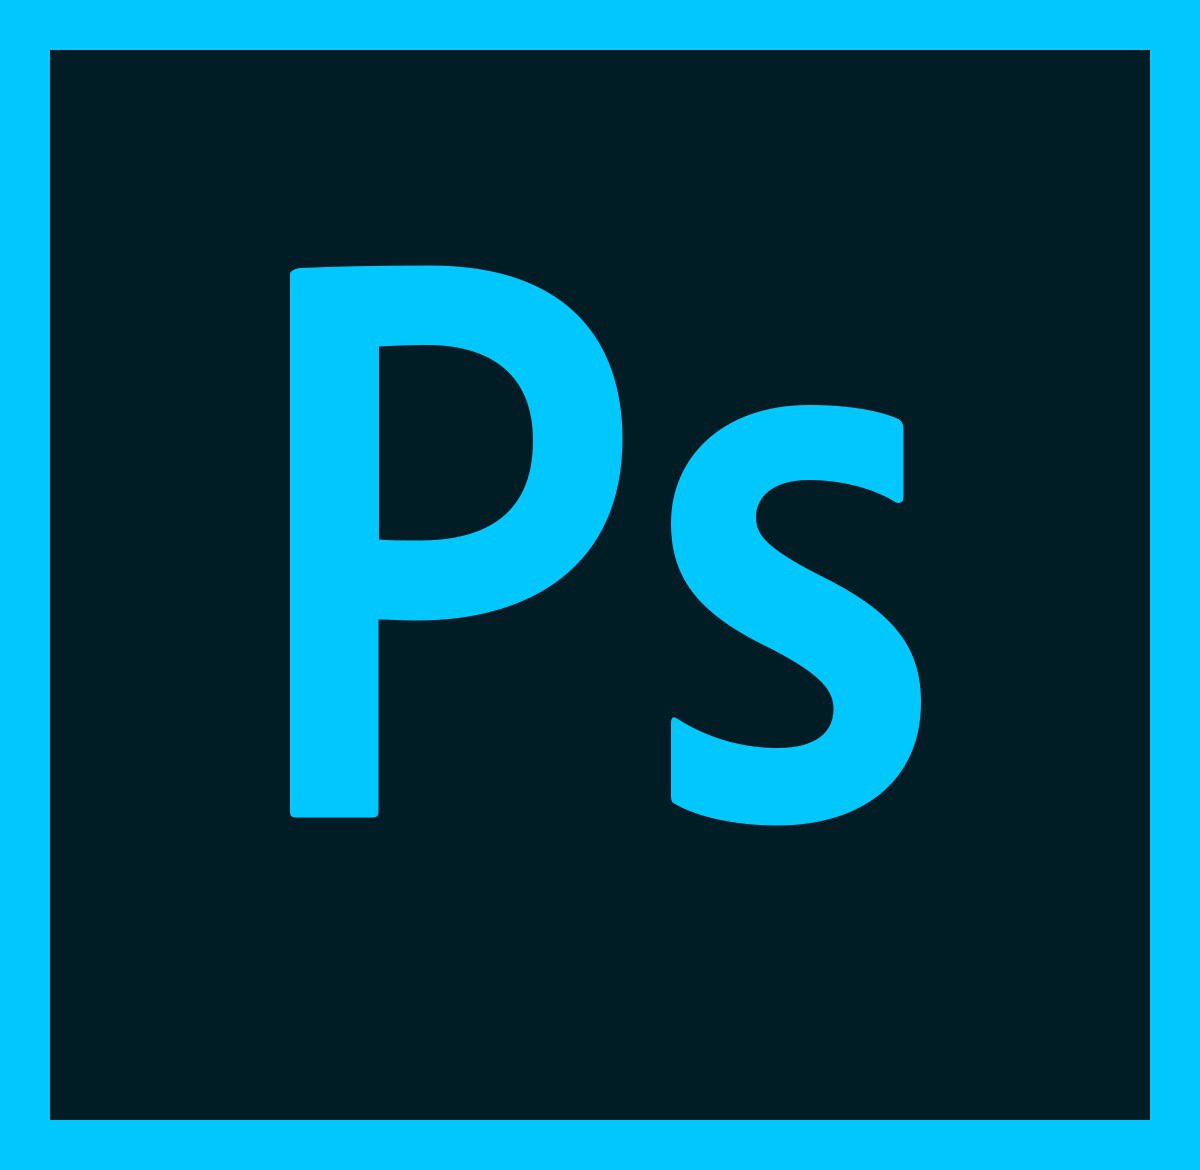 Adobe Photoshop CC (2019) (Permanent License) No More Subsription Fees.(Tangible Item)